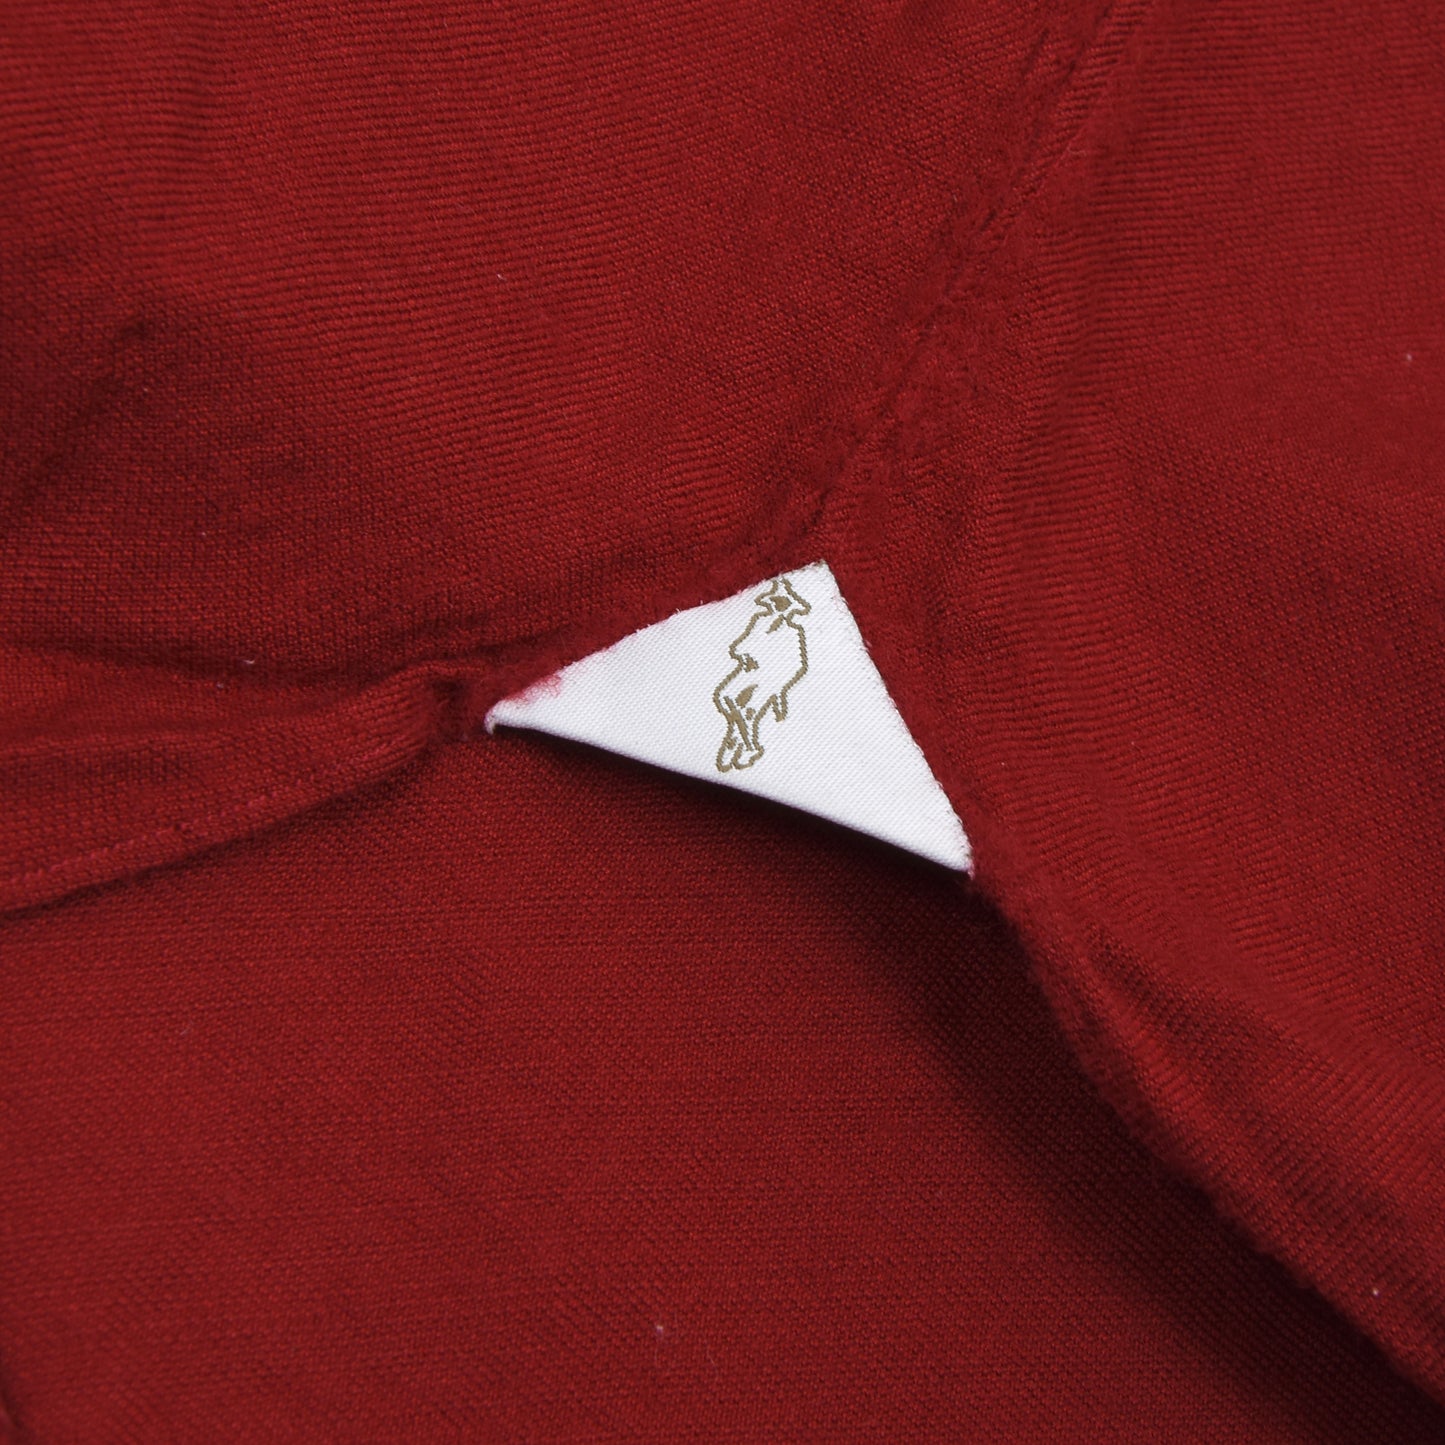 Arny's Paris Silk-Wool-Cashmere Shirt Size L - Red